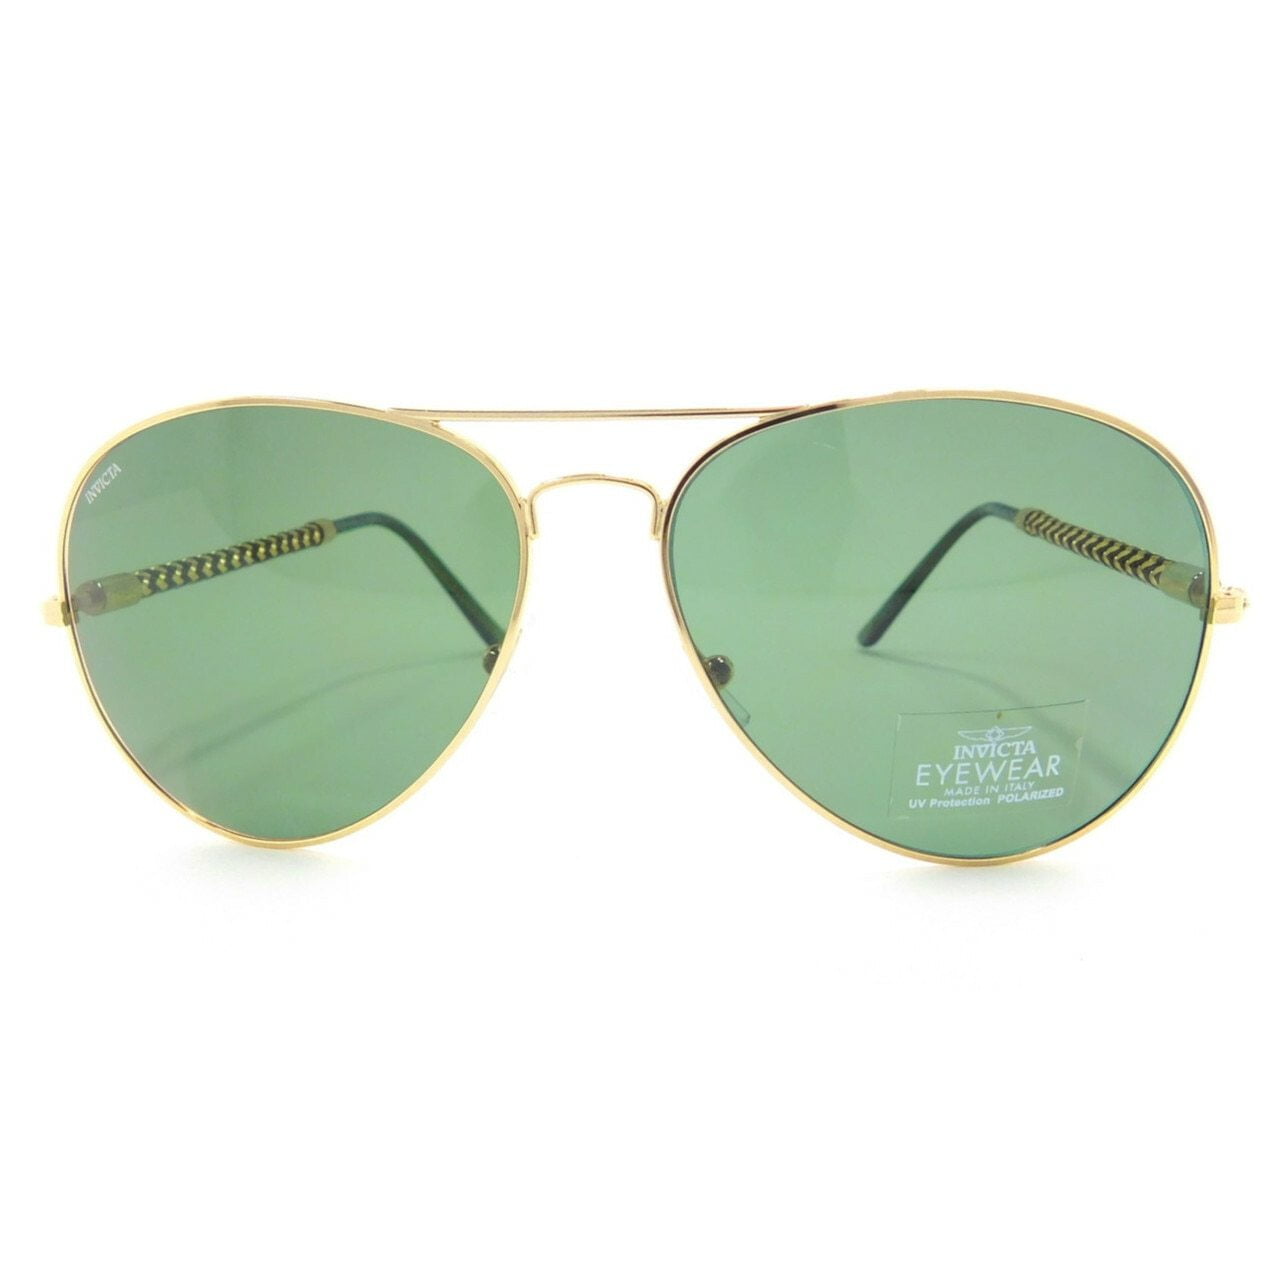 Invicta IEW017 Aviator Sunglasses Your Choice of 11 Colors 